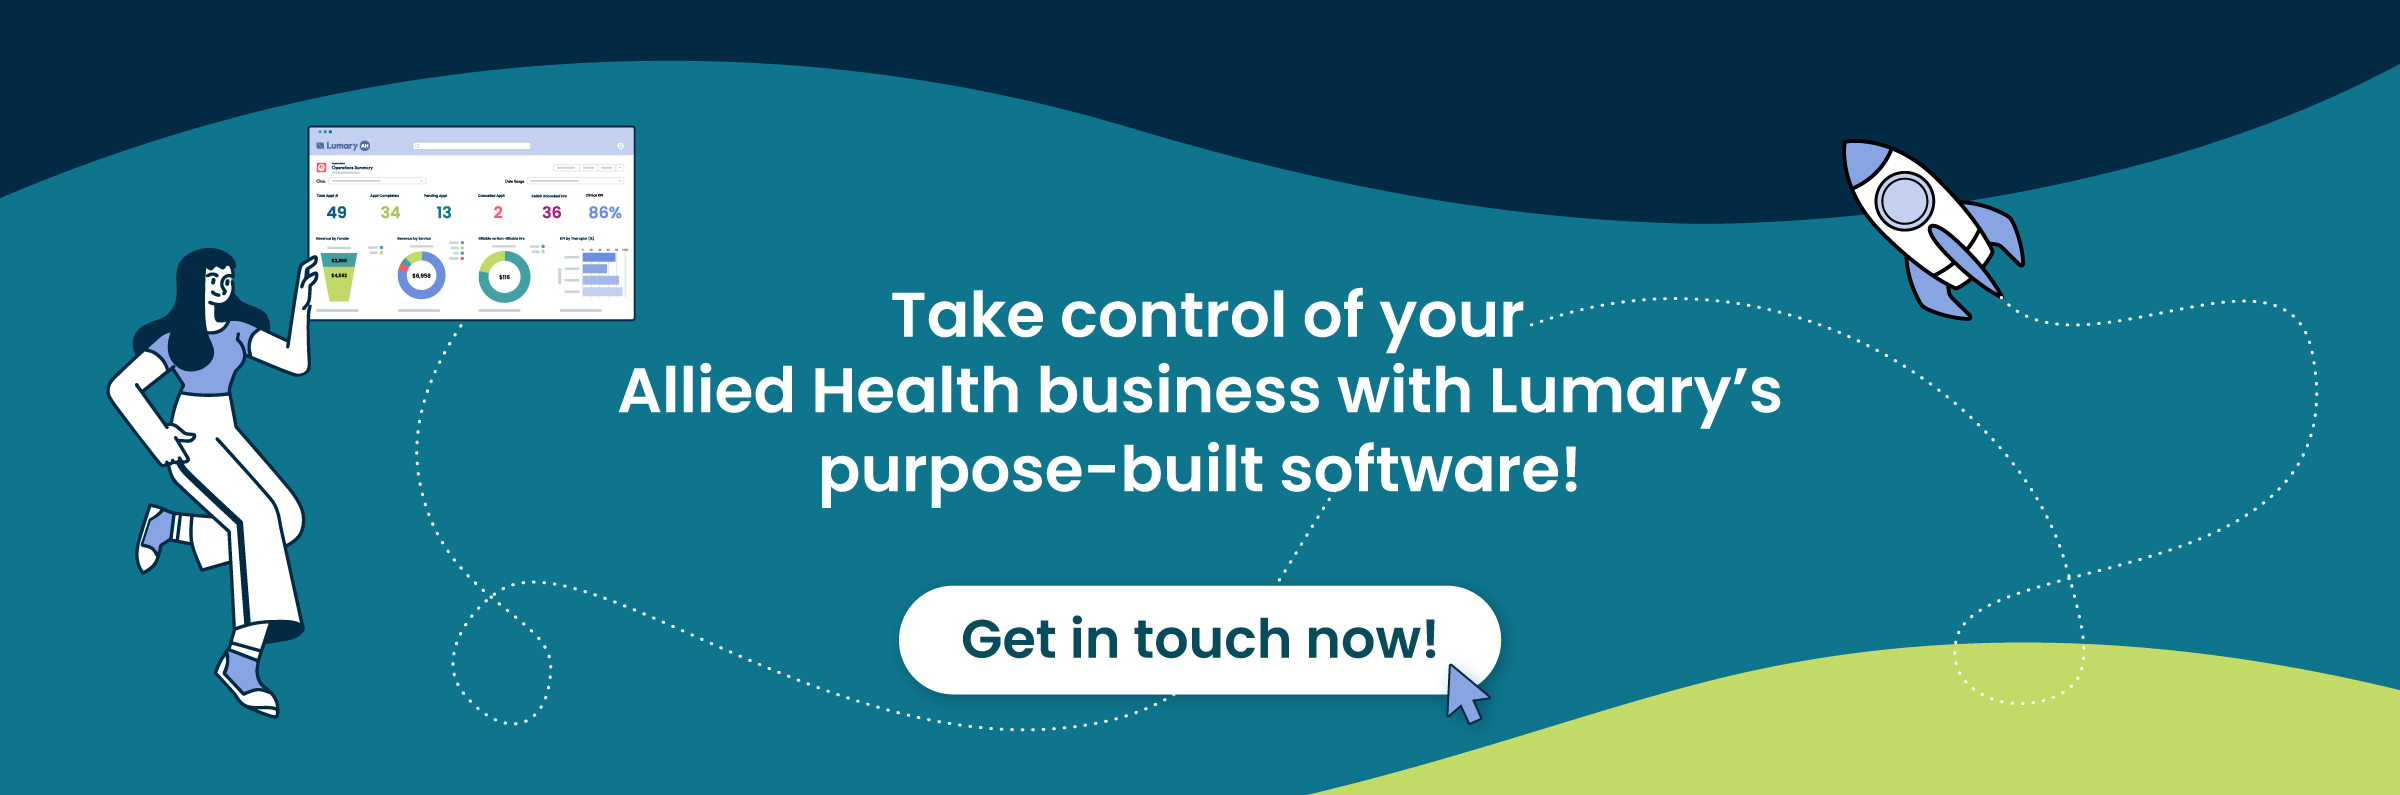 Take control of your Allied Health business with Lumary's purpose-built software